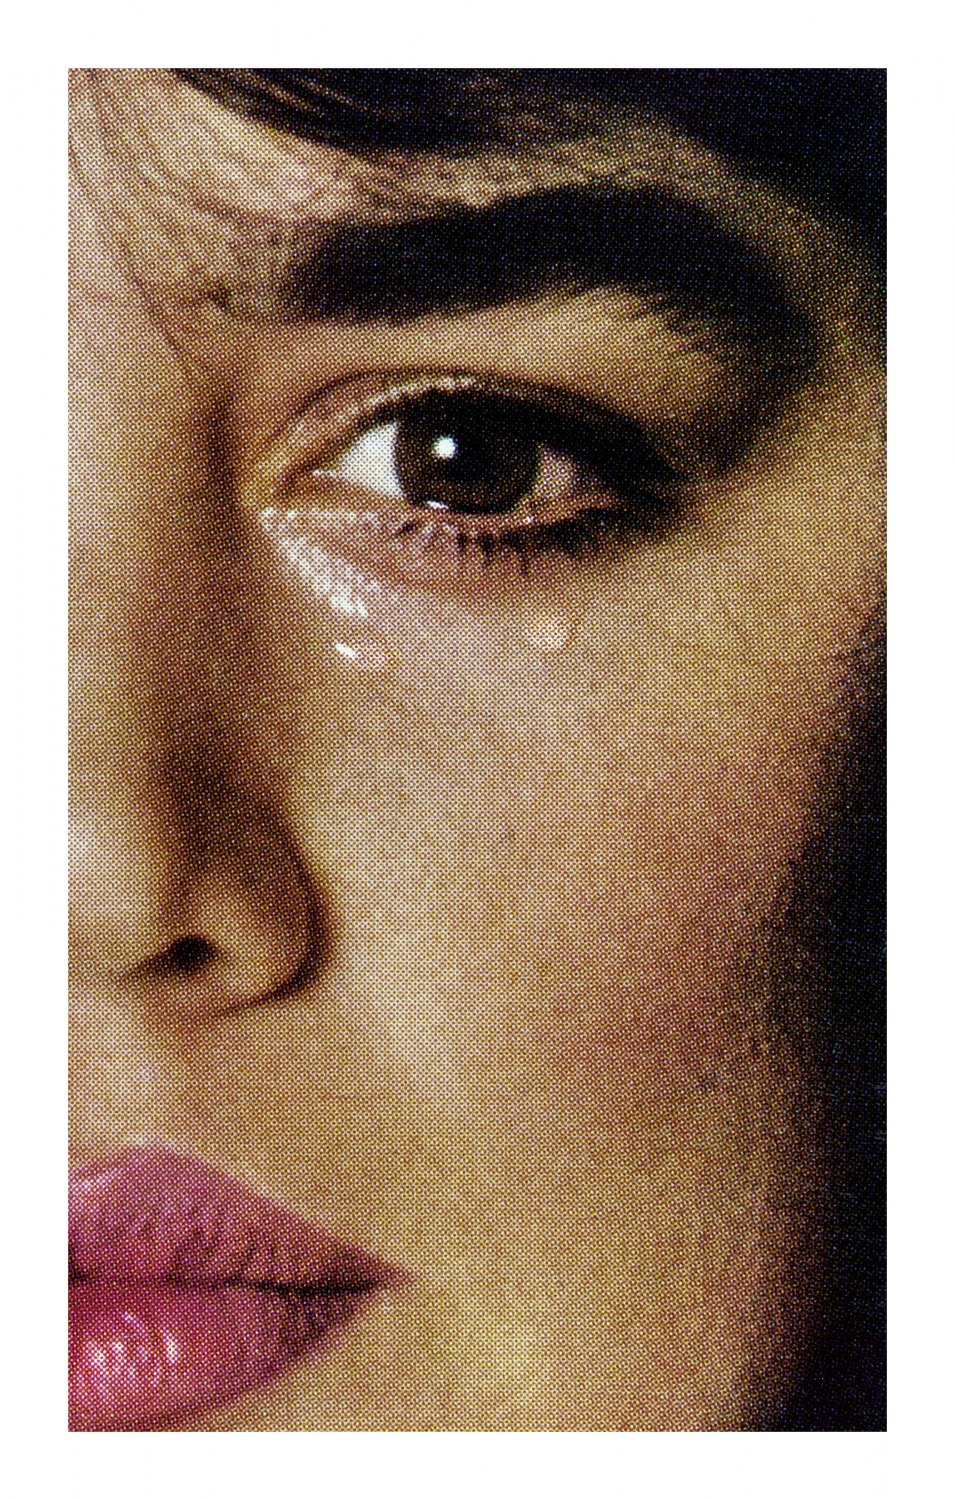 Anne Collier Woman Crying #17, 2018 C-print, 137 x 86 cm